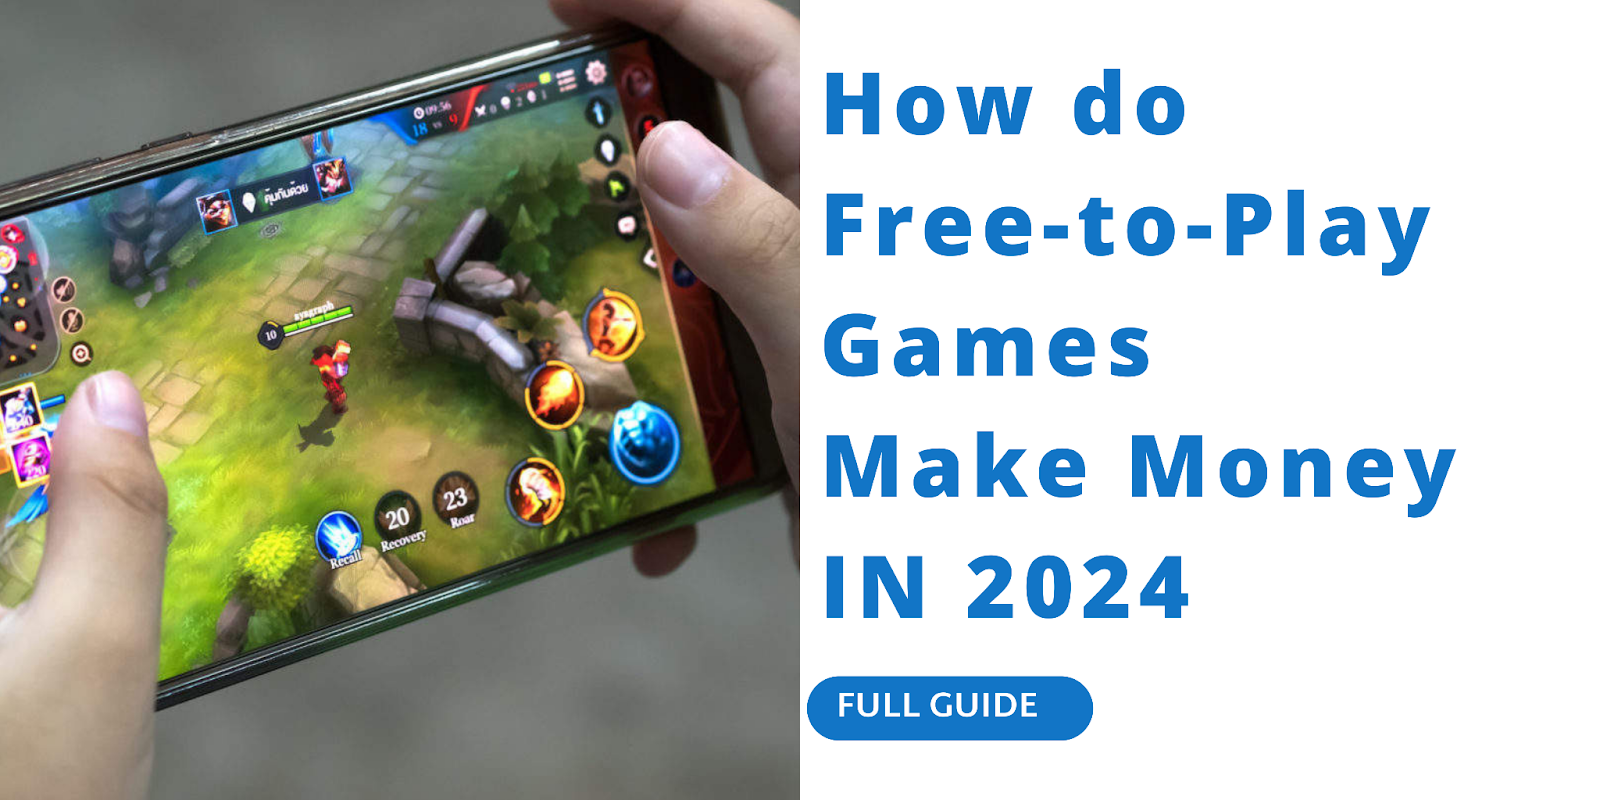 12 Proven Strategies for How Free Games Make Money in 2024